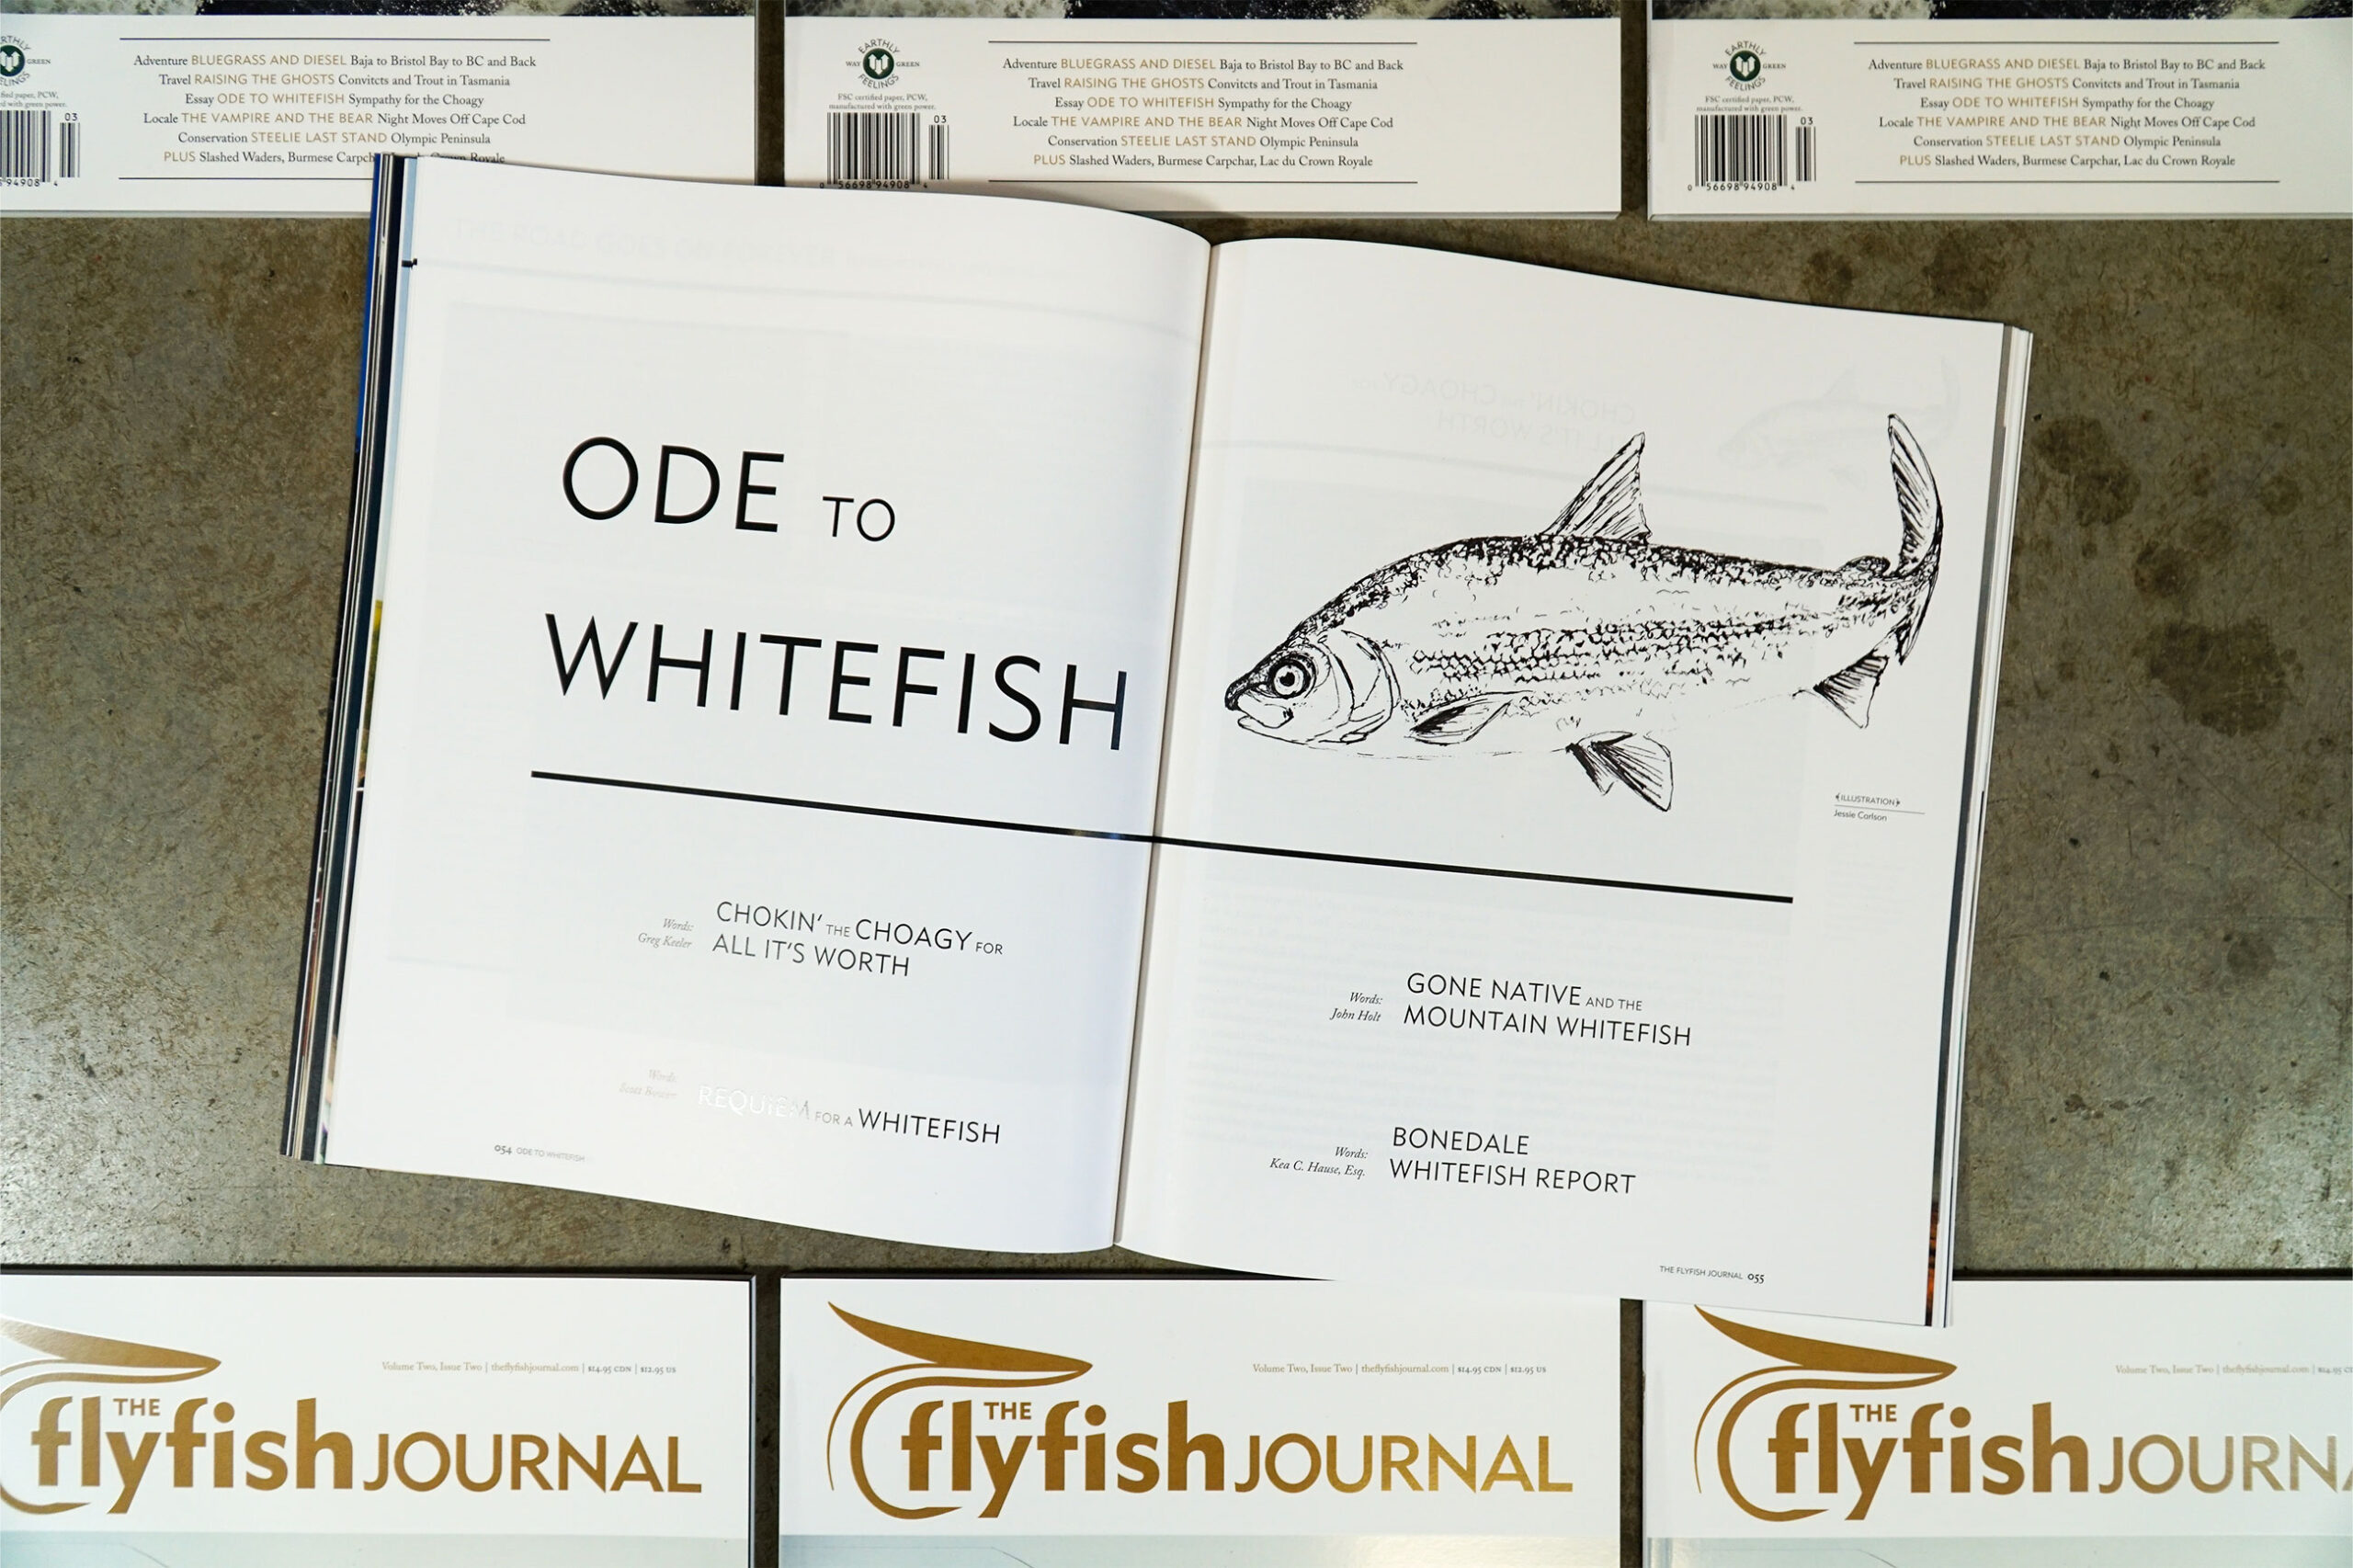 The Flyfish Journal Volume 2 Issue 2 Feature Ode to Whitefish